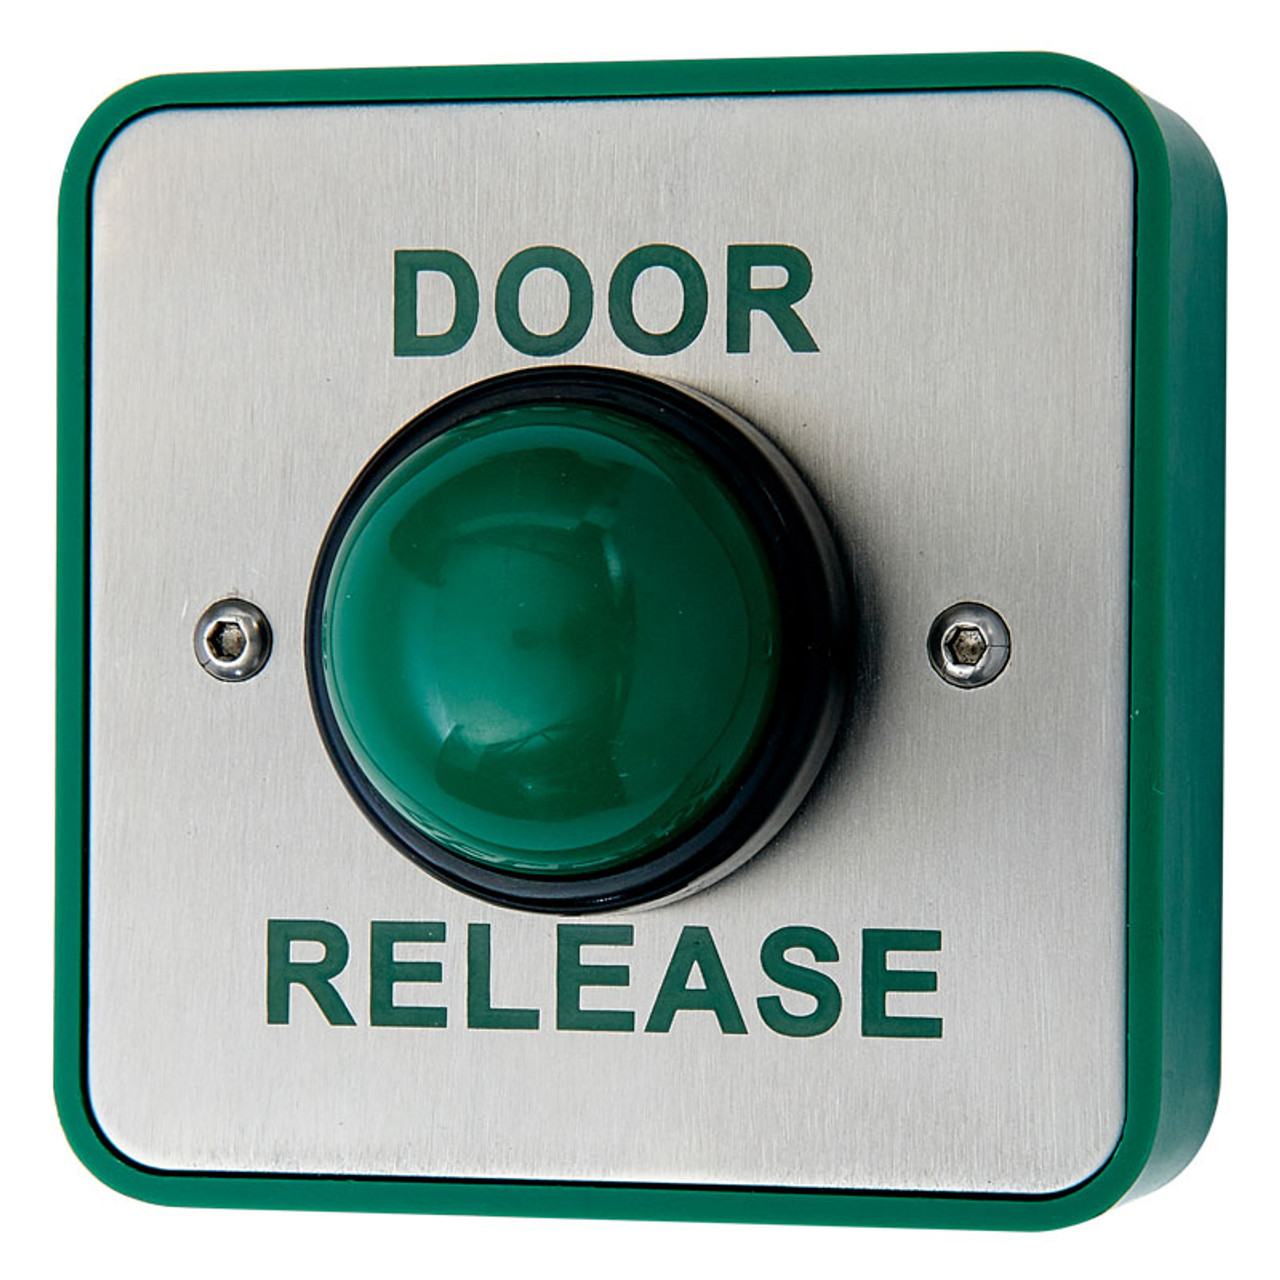 GREEN DOME PRESS TO EXIT BUTTON SURFACE MOUNTED WITH FINGER GUARD